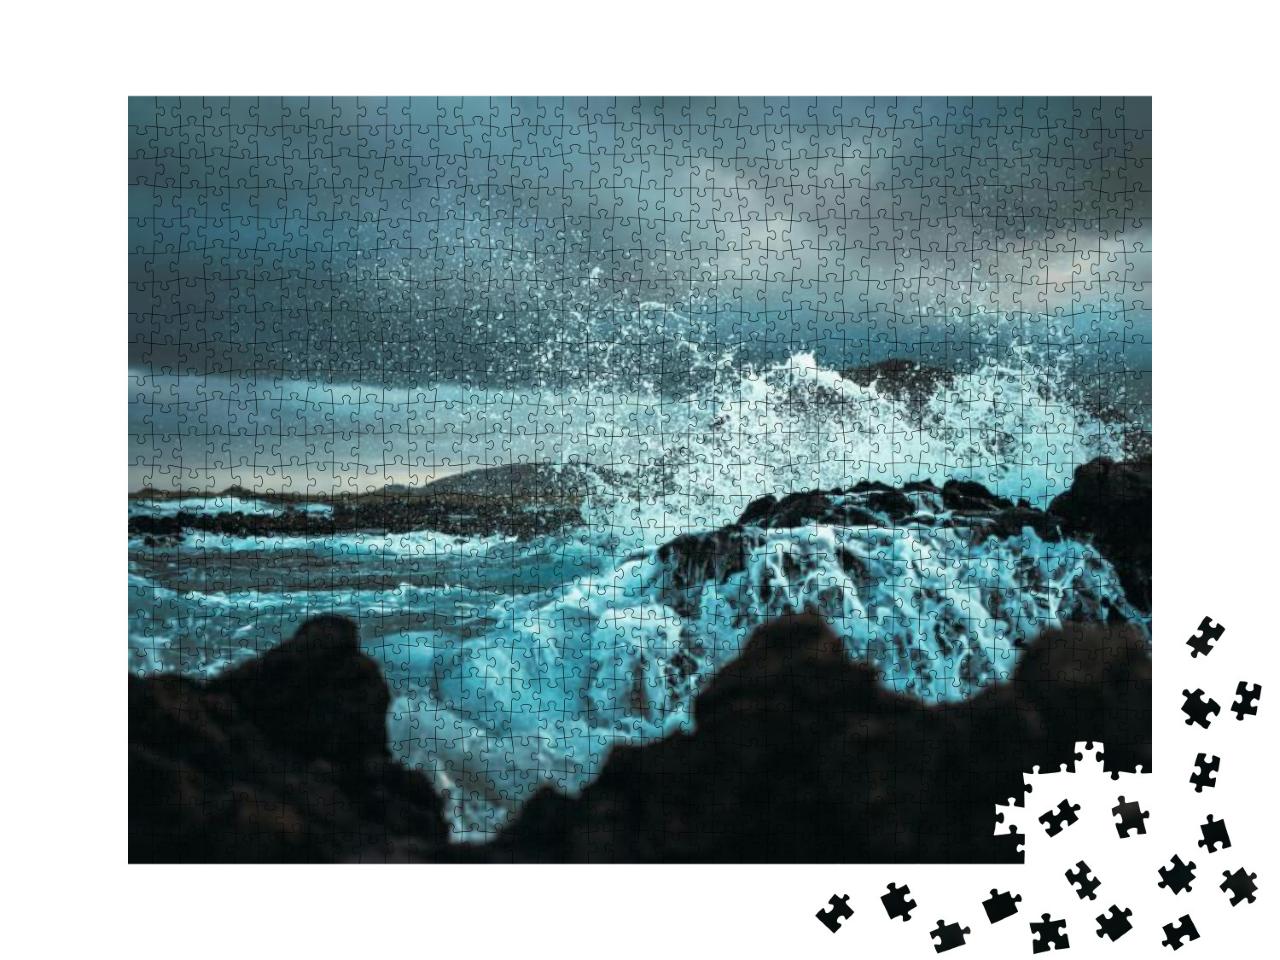 Wave Mid Splash Frozen in Air... Jigsaw Puzzle with 1000 pieces